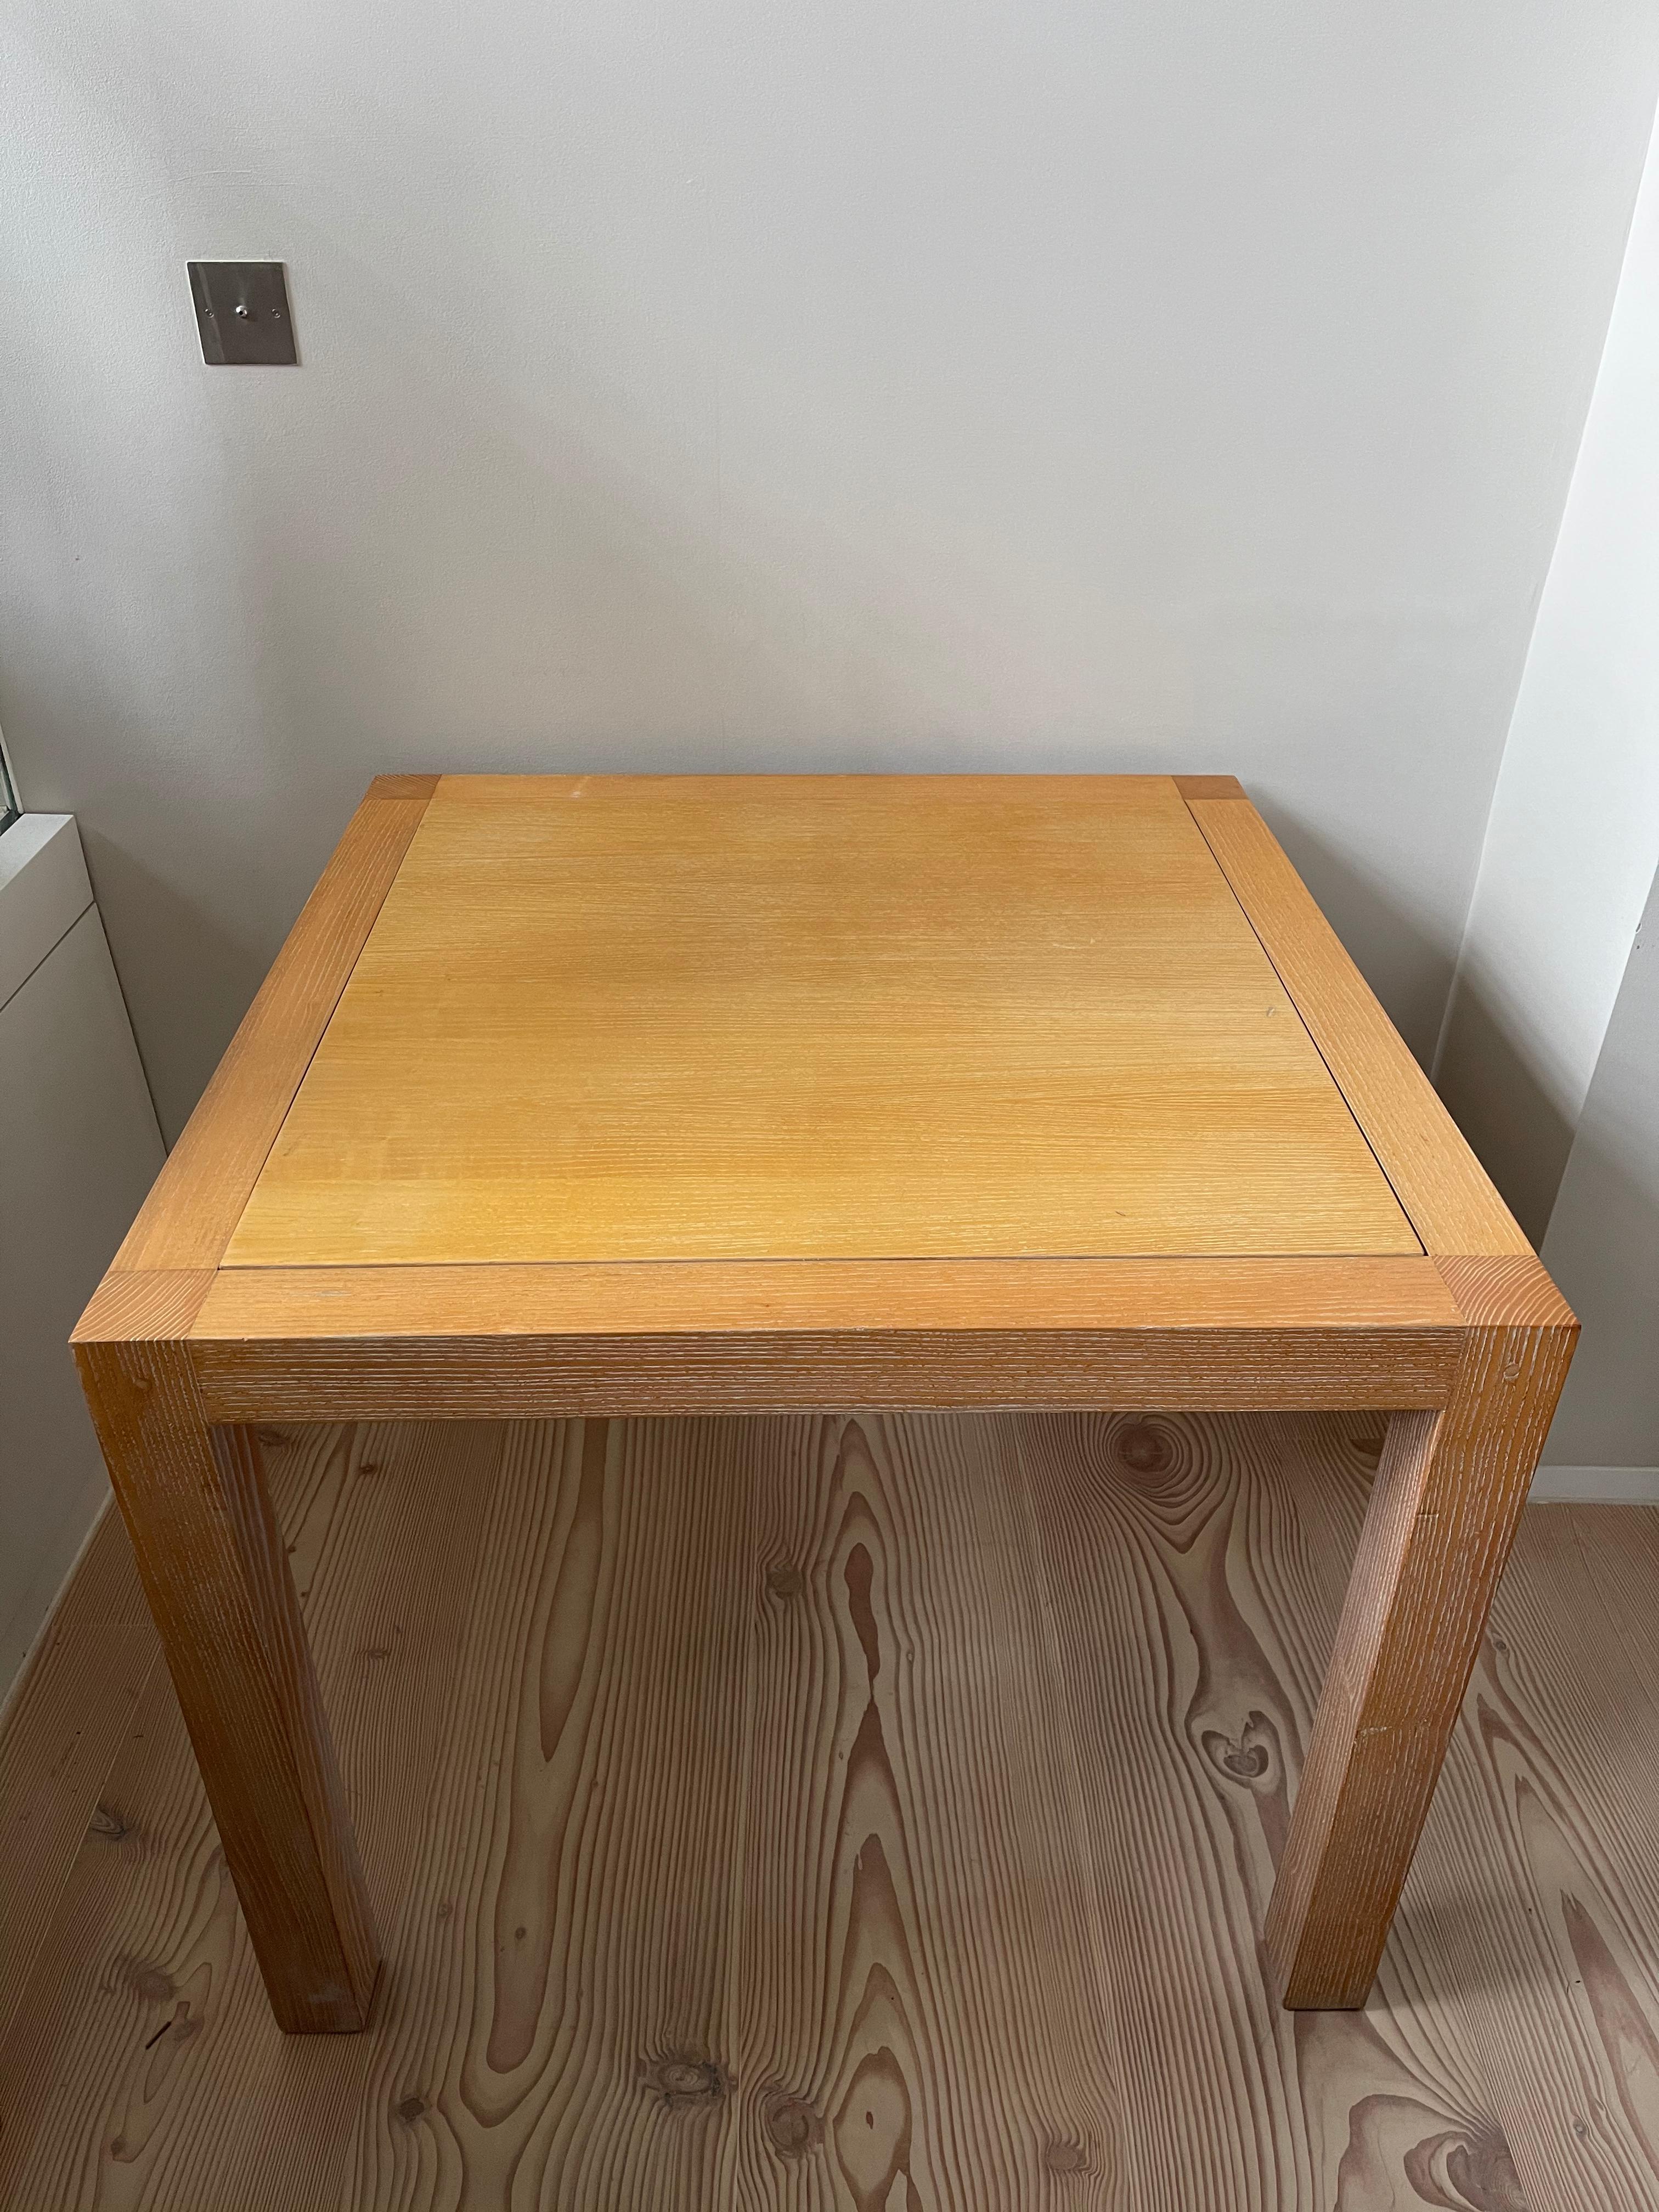 Game table in Cerused oak by Jacques Grange designed for Yves Saint Laurent's studio in Avenue de Breteuil.
The table top has one side in felt and one side in Cerused oak.
Original condition, with slight marks of use. The felt may need cleaning or